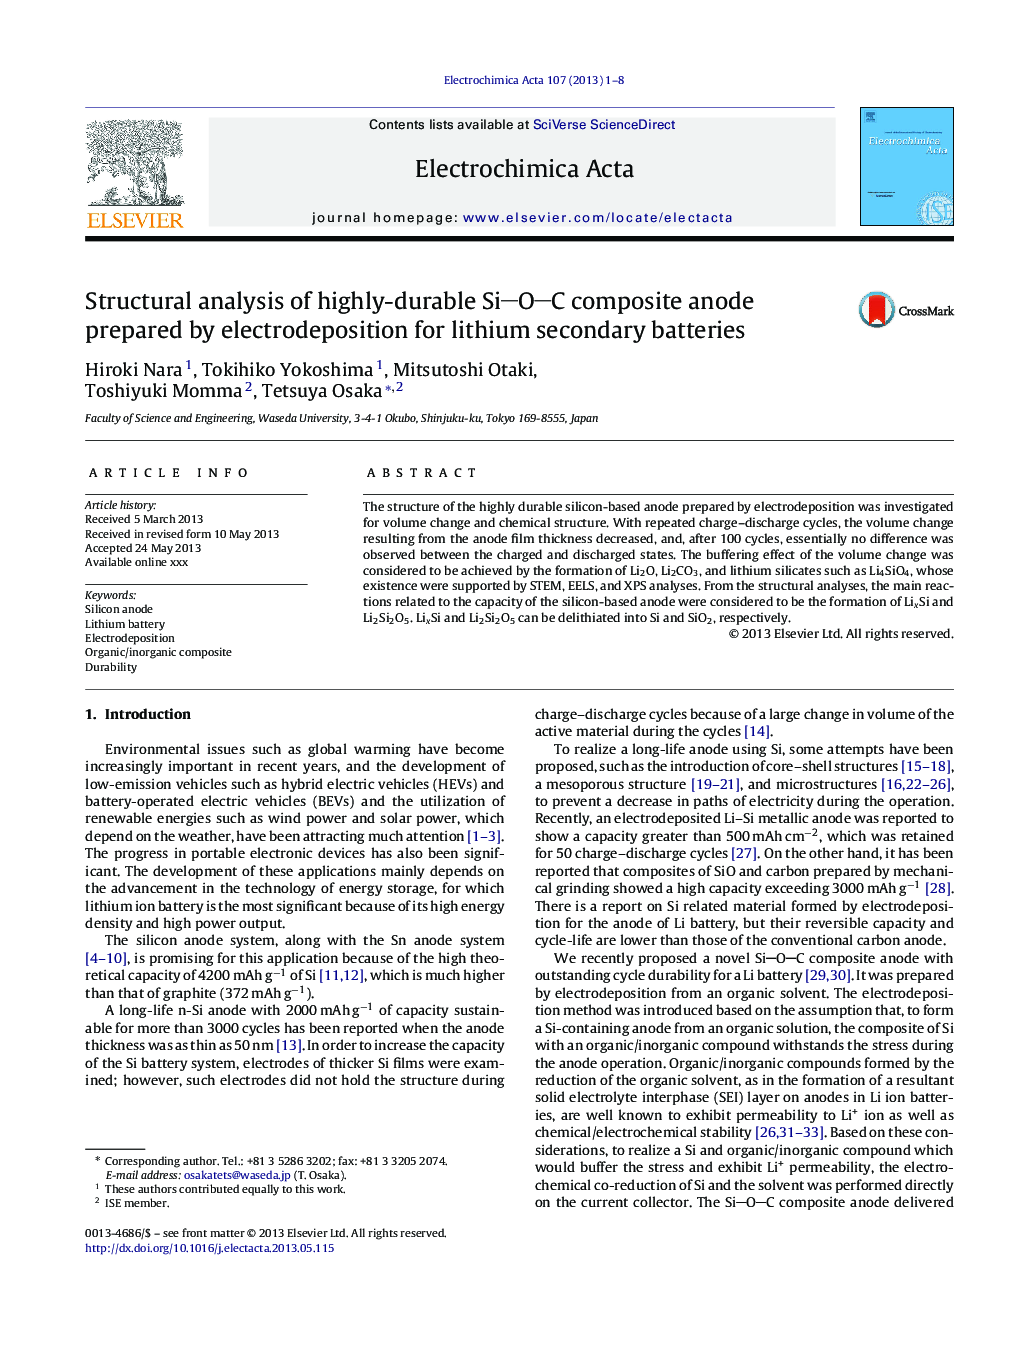 Structural analysis of highly-durable SiOC composite anode prepared by electrodeposition for lithium secondary batteries